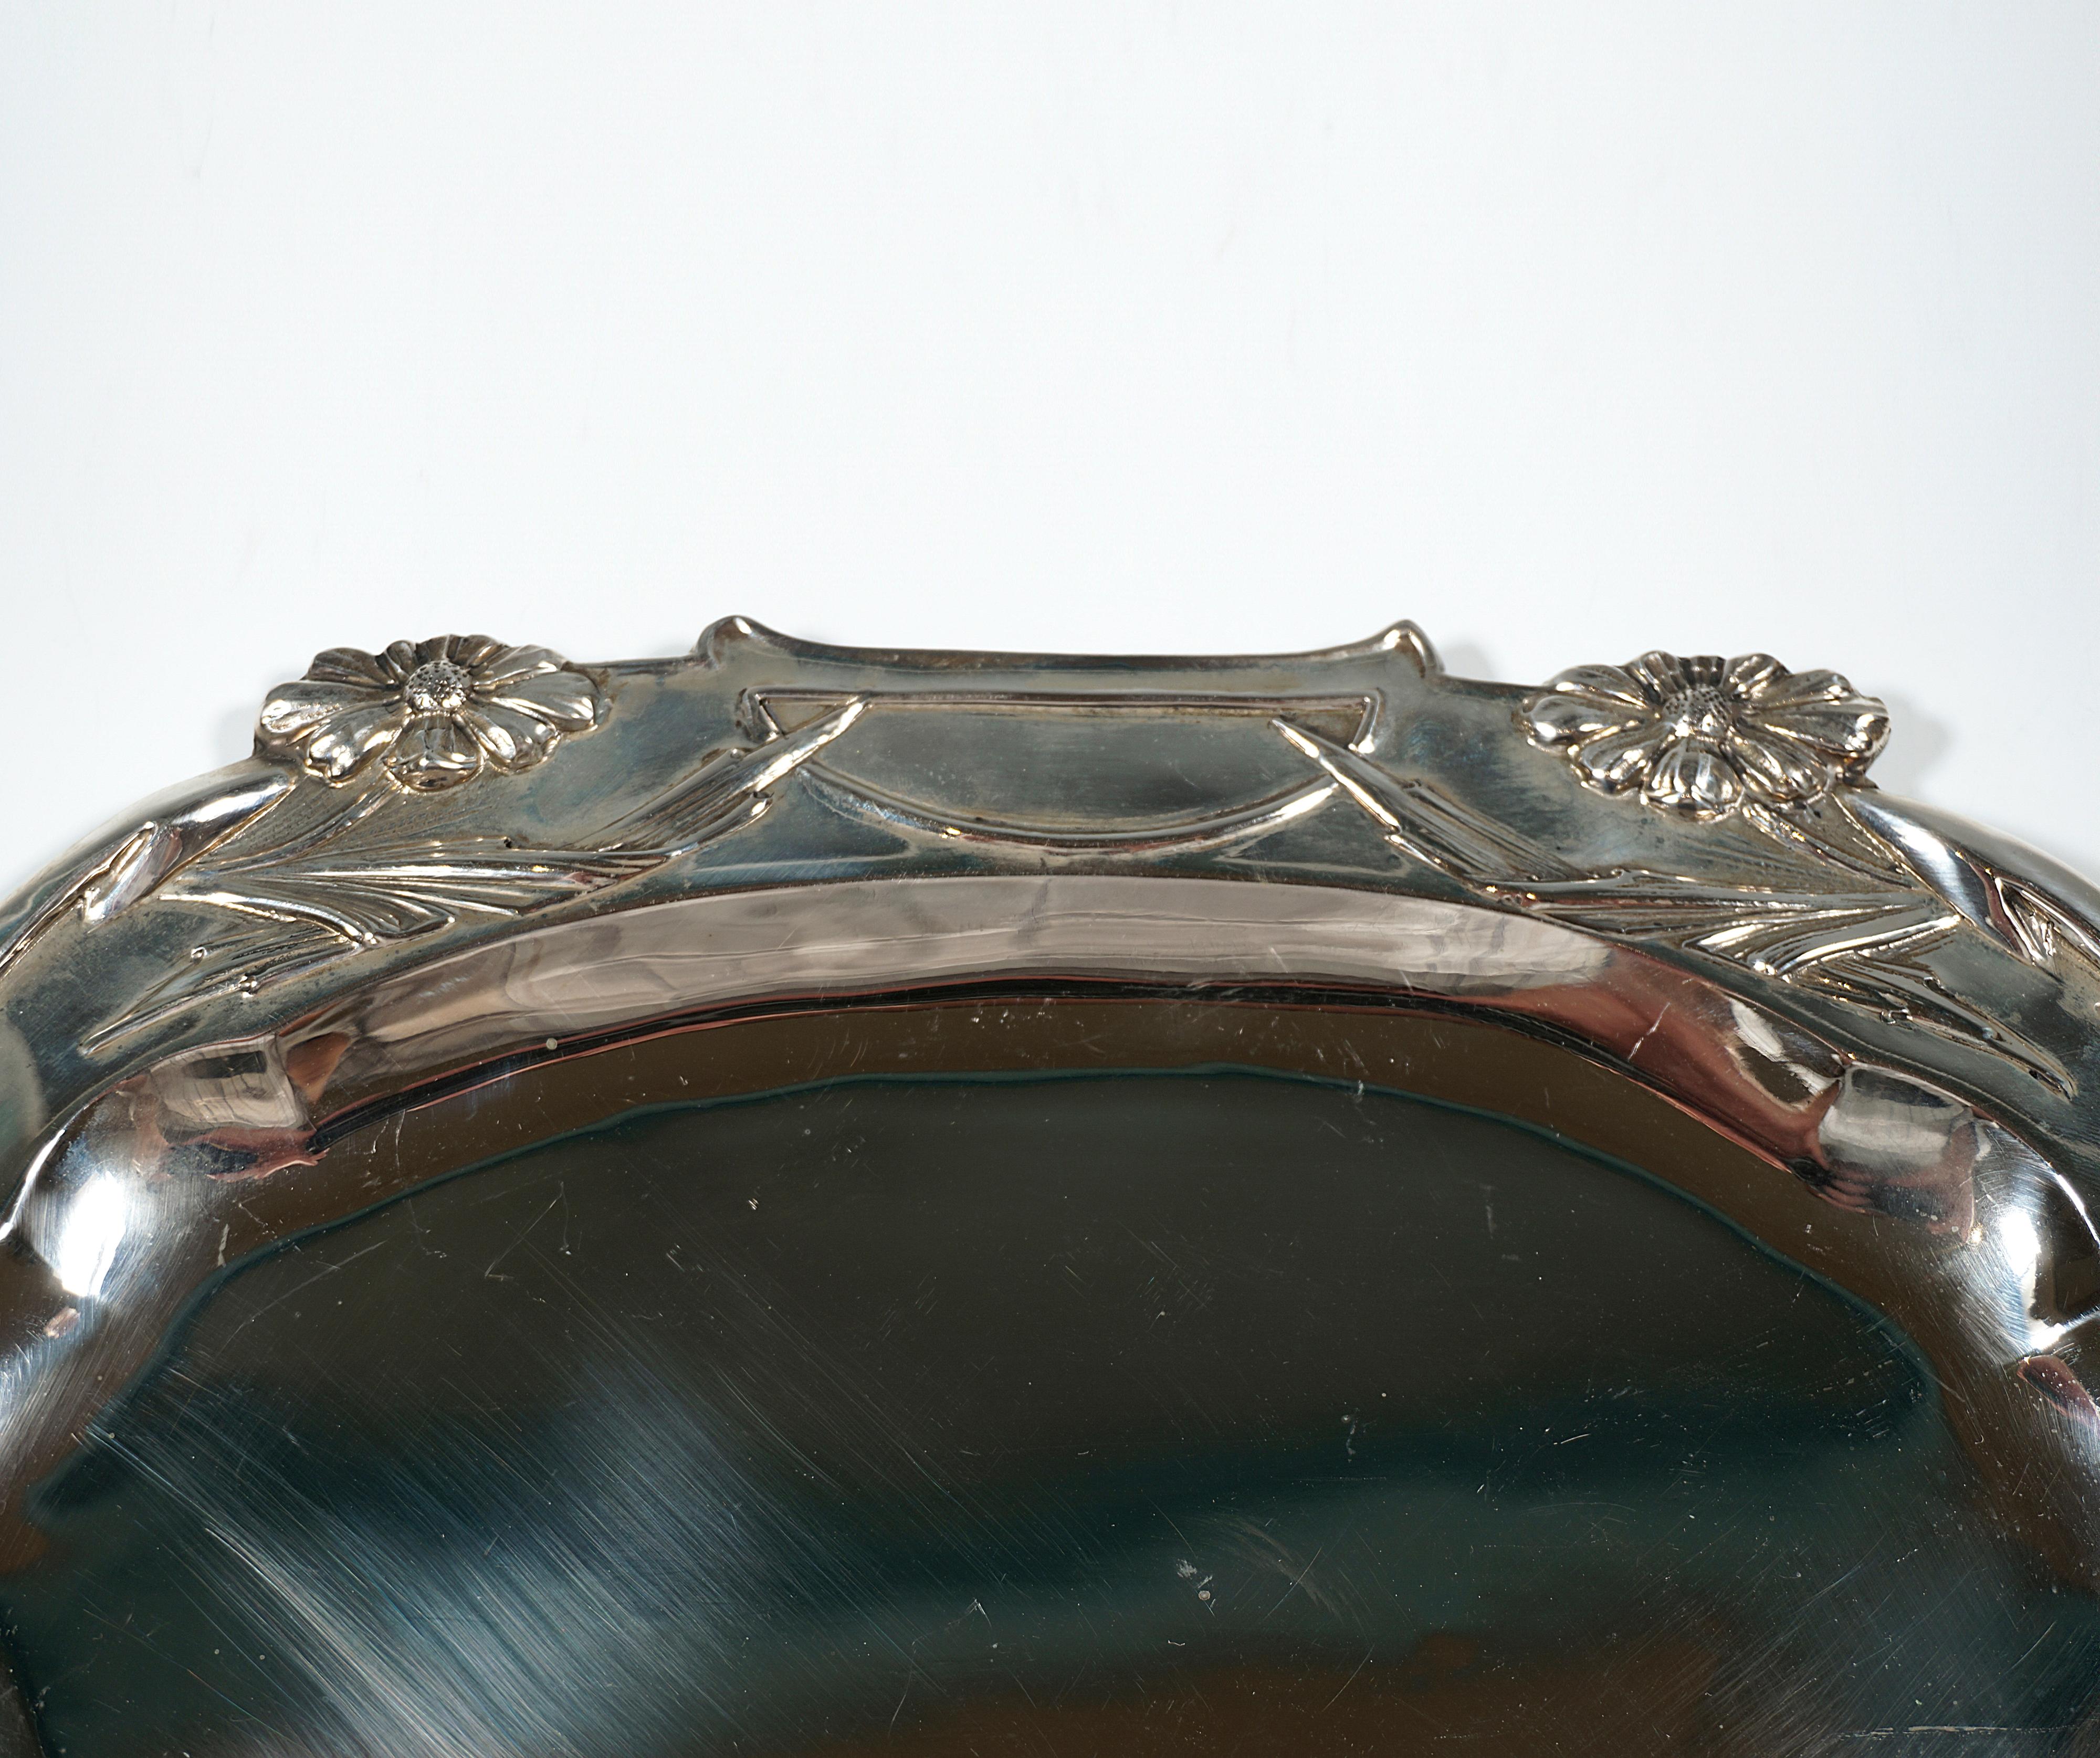 Small silver tray with mirror of basic oval shape, wide rim decorated with floral relief and handles shaped as ribbons extending the oval into a navette.

Hallmarks:
Diana's head - Austrian official hallmark 1872-1922 for 800 Silver
Three pills in a